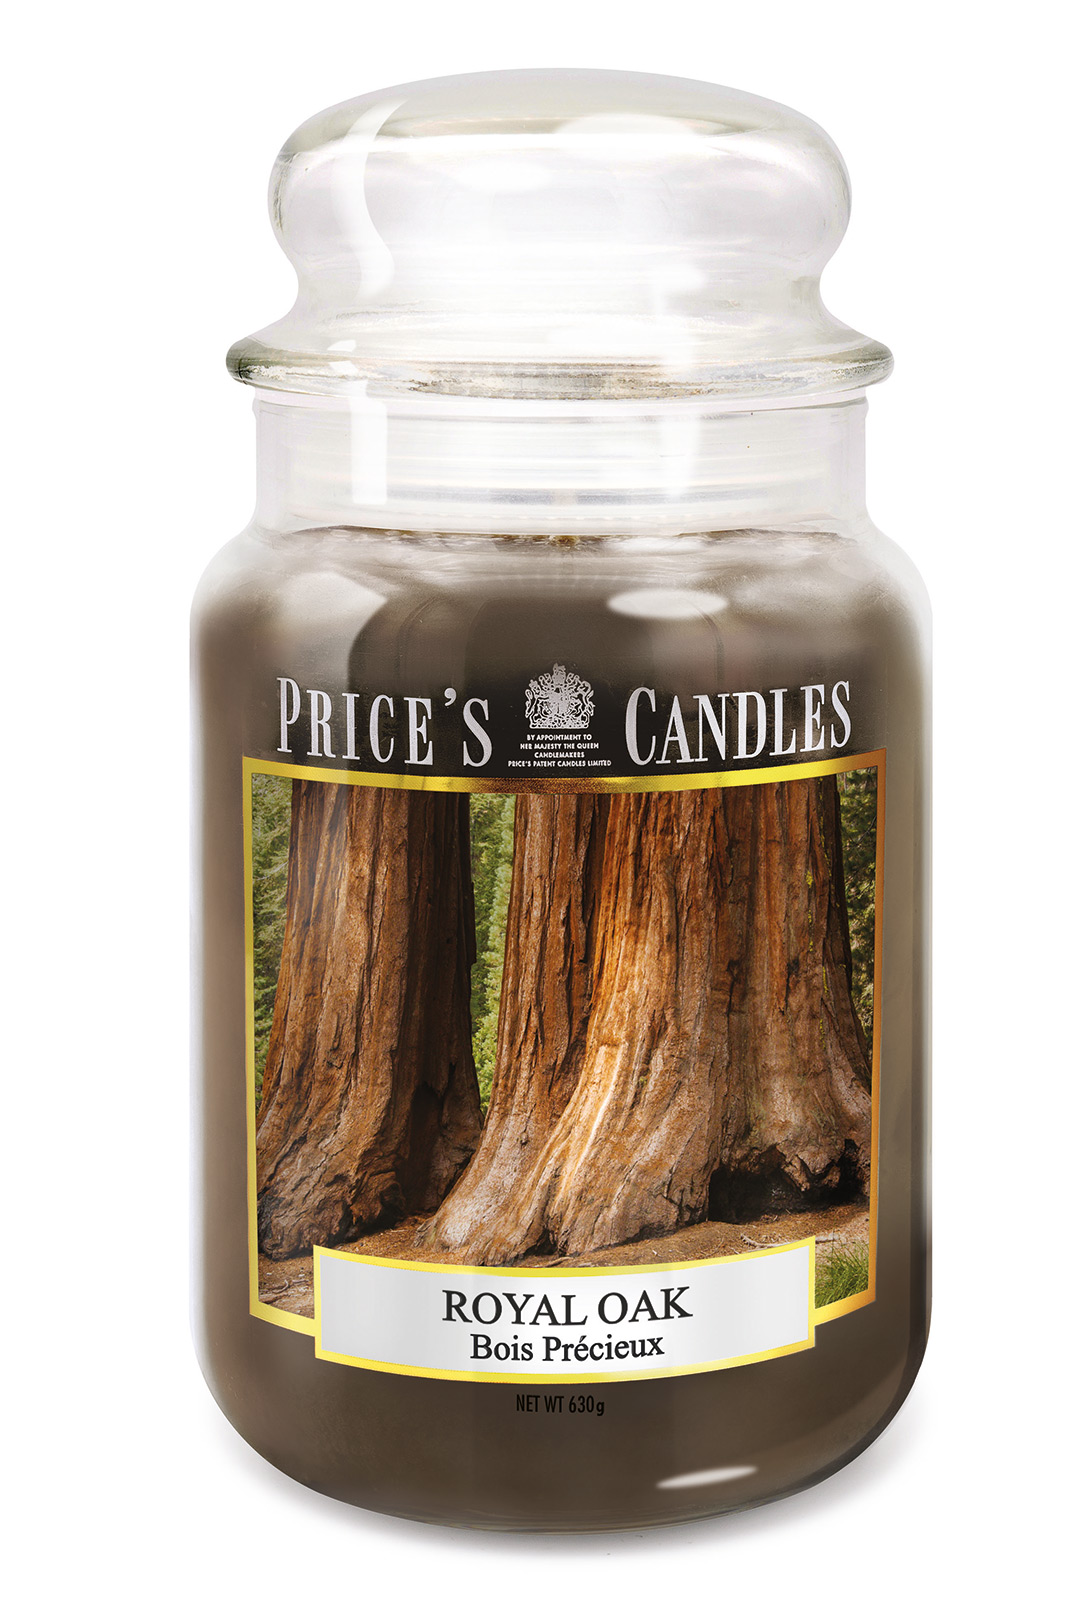 Prices Candle "Royal Oak" 630g   